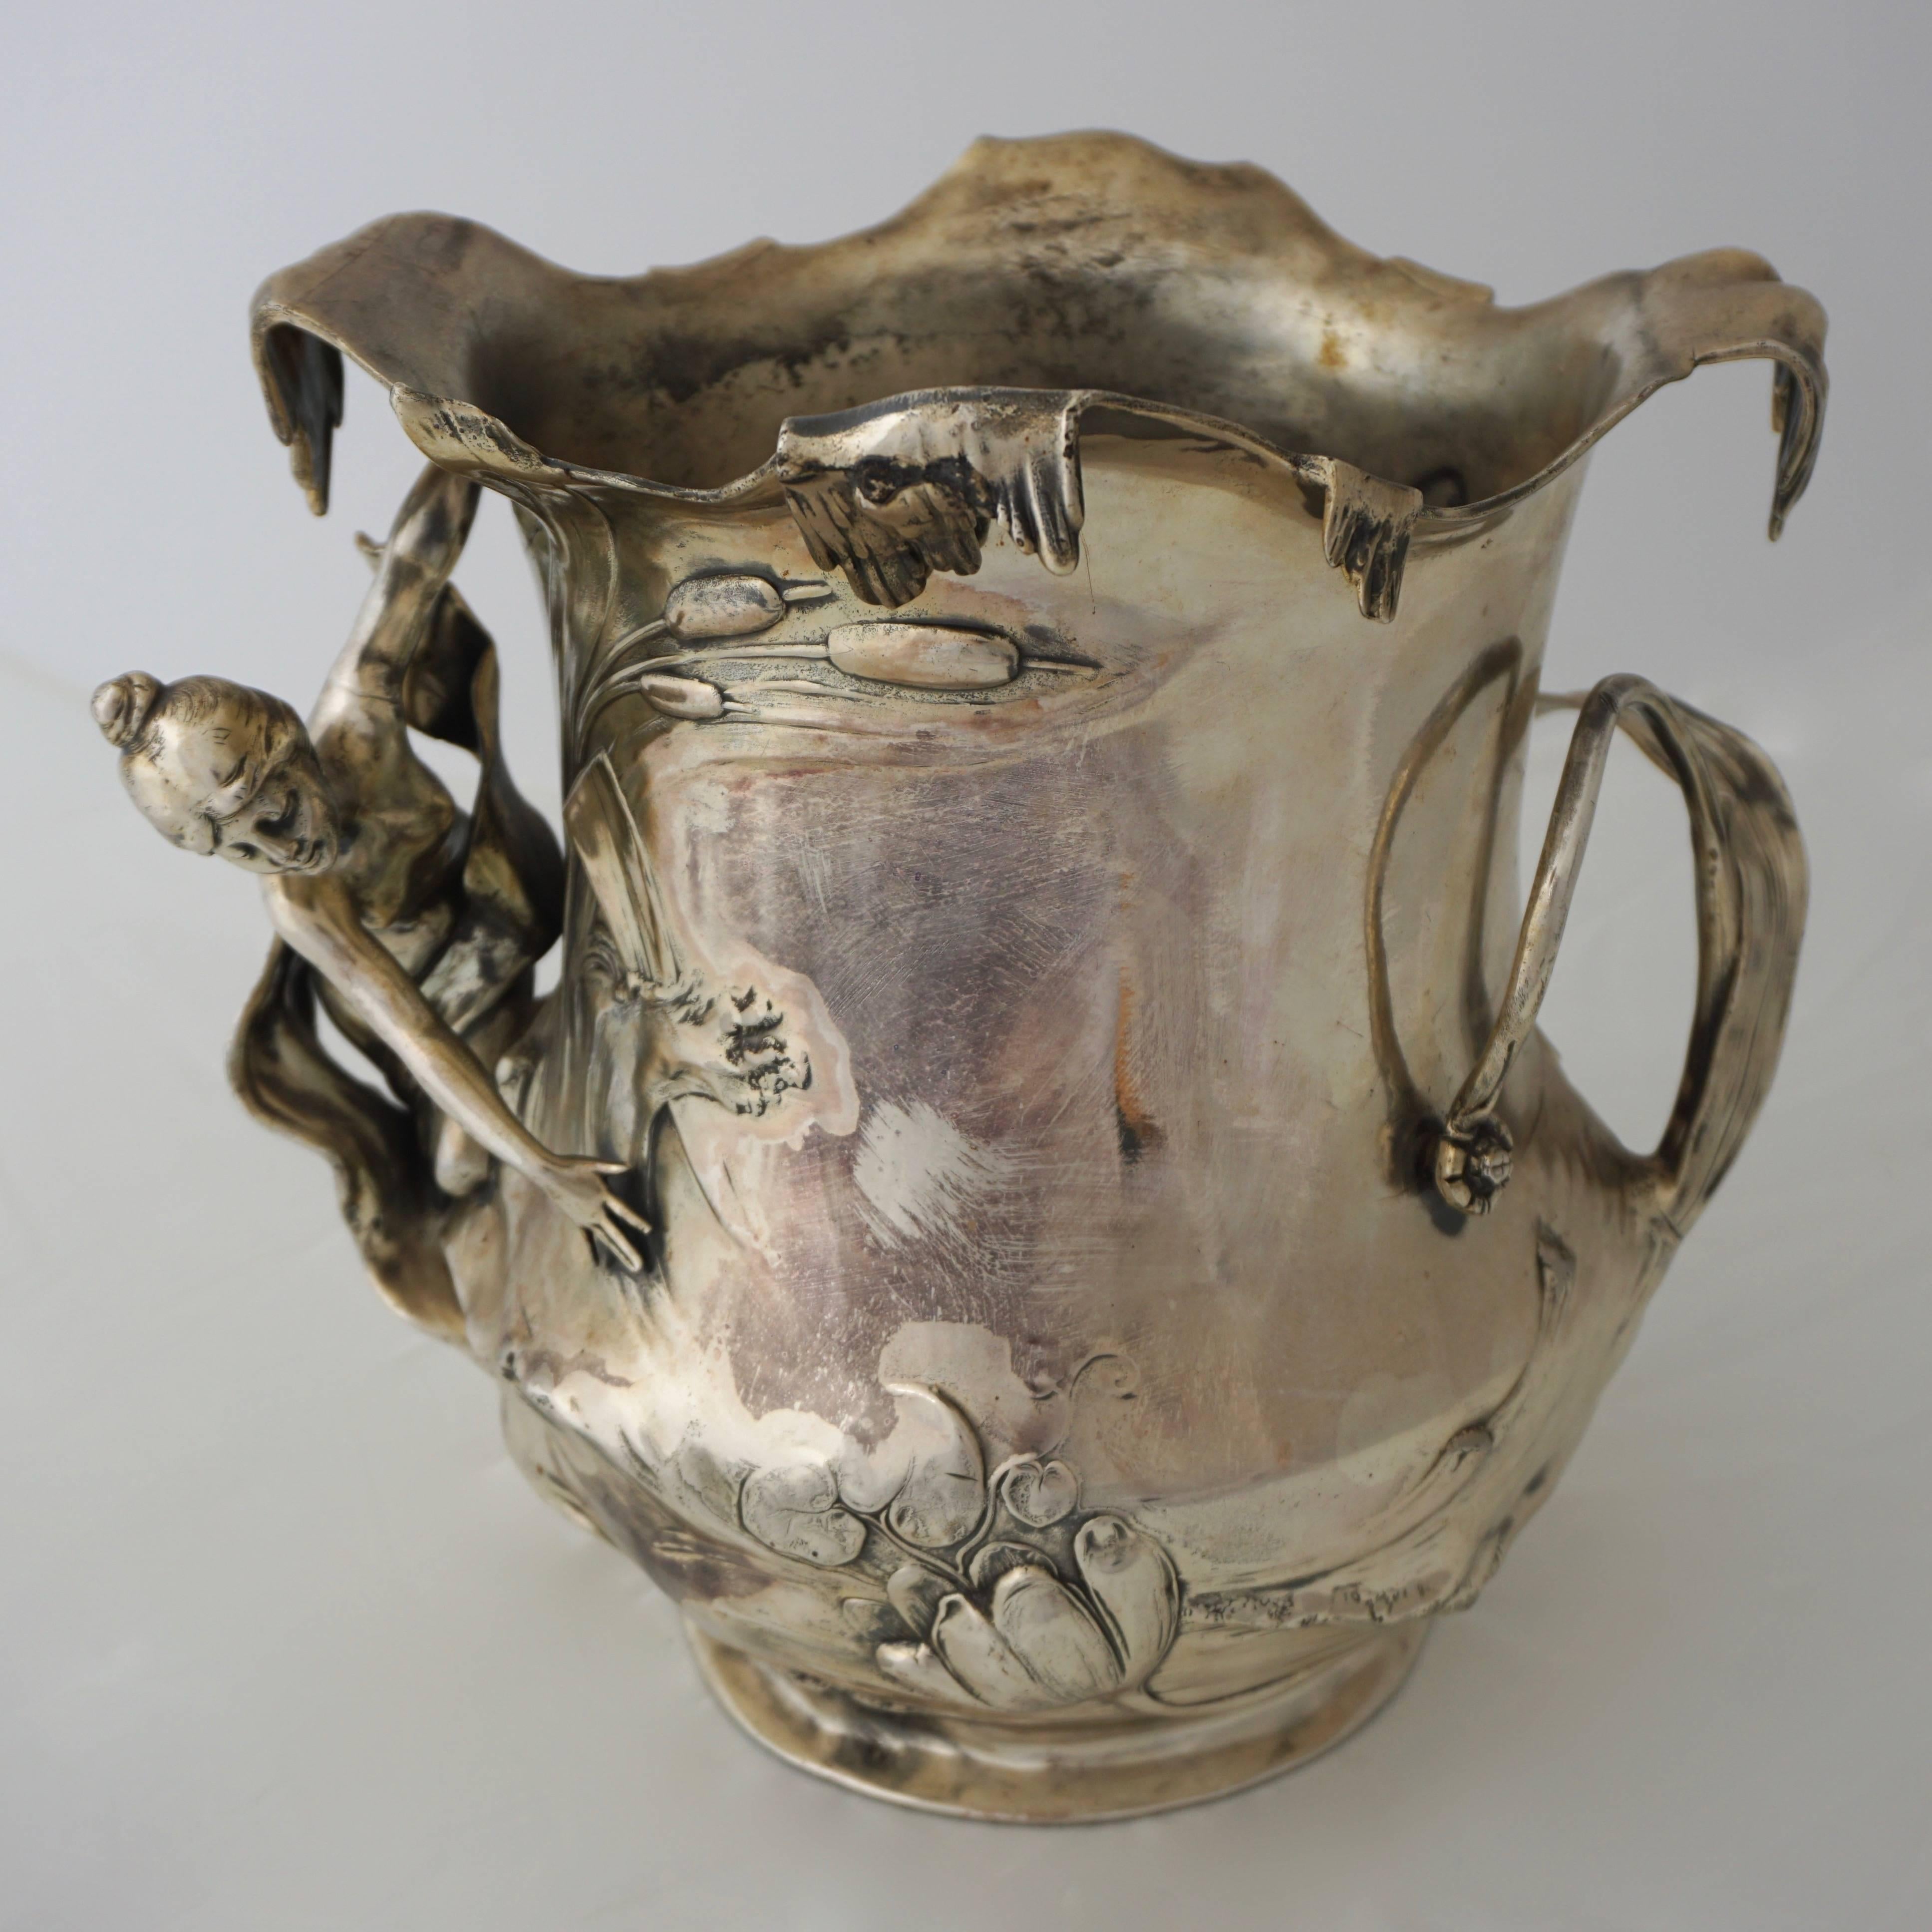 Art Nouveau WMF silver plated pewter champagne bucket with high relief decoration, Germany, circa 1906.
In very good original condition, as shown in the pictures. Can also be used as a vase.

By 1900 WMF was the world's largest producer of